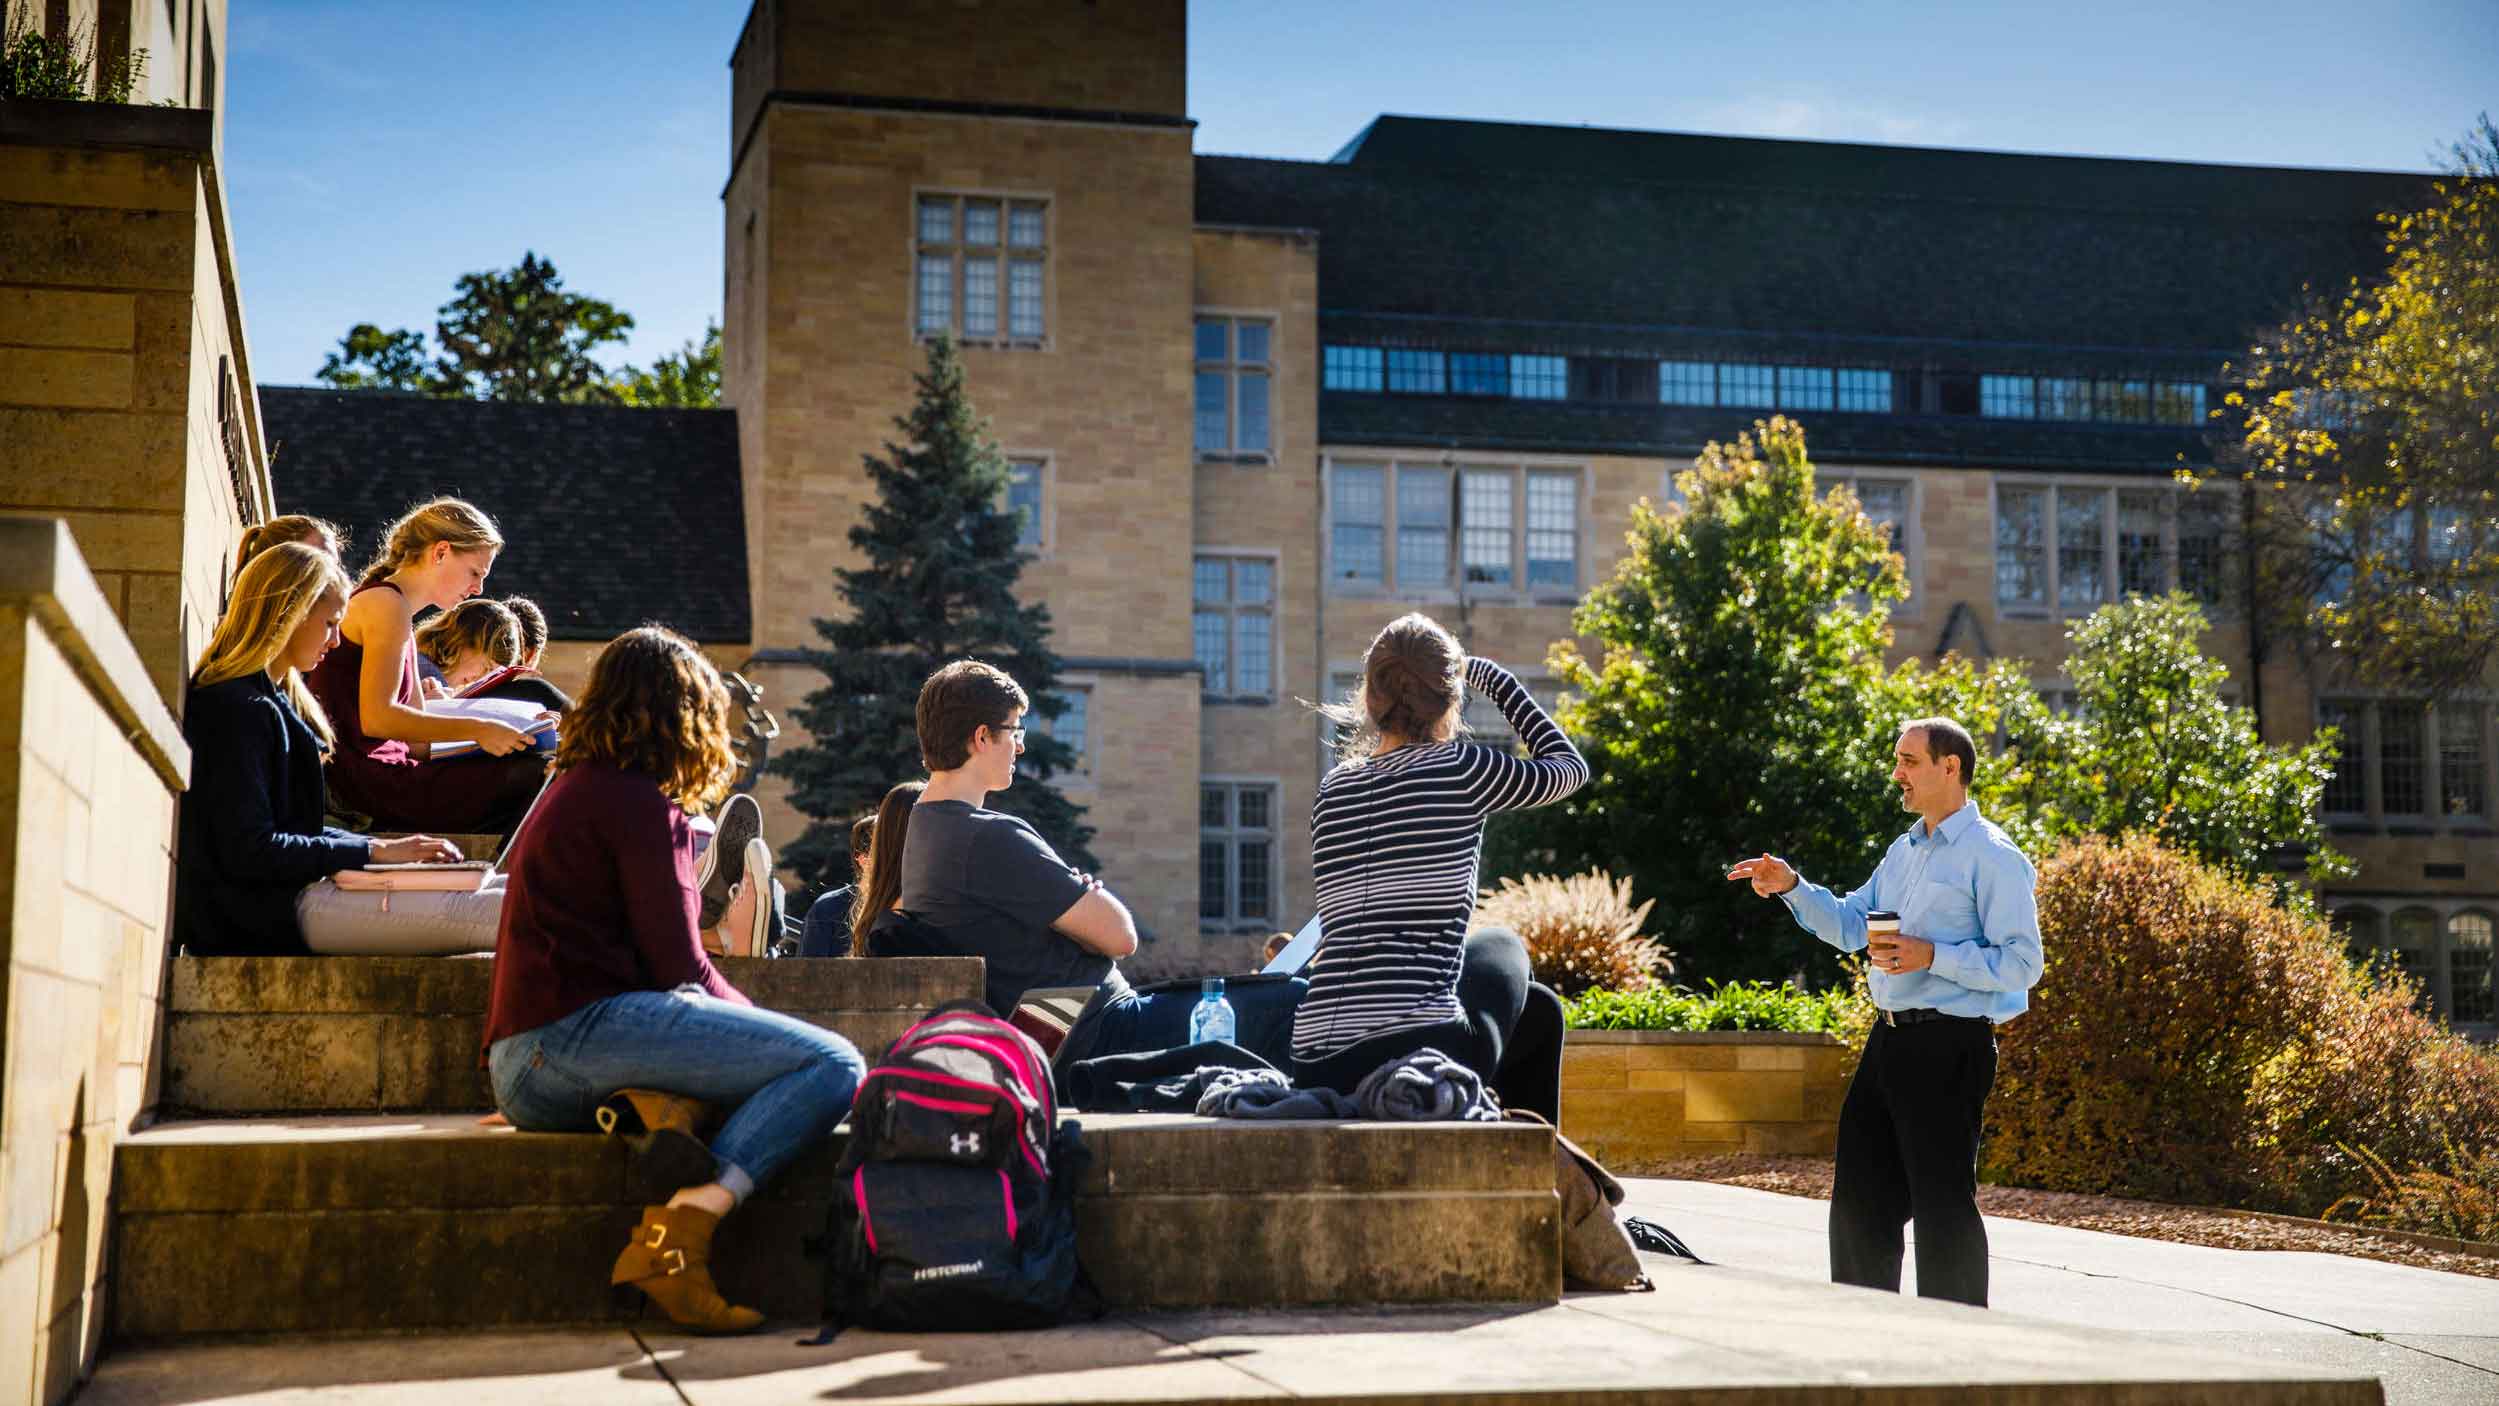 Professor teaches class outside on a sunny day